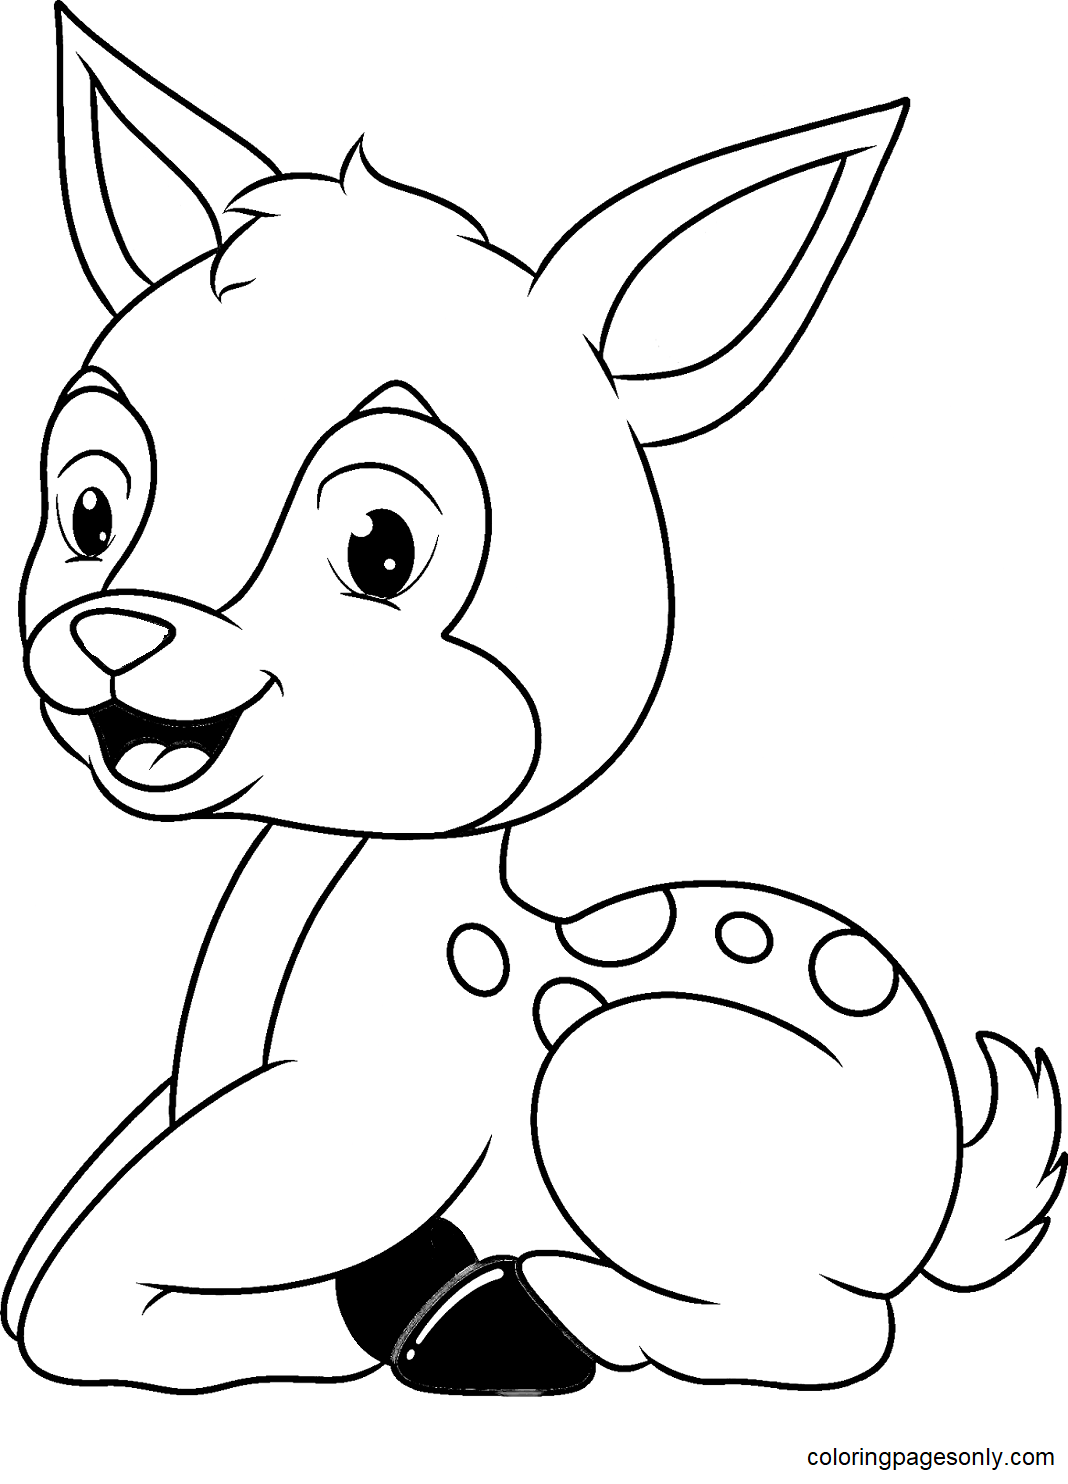 Printable Fawn Coloring Page